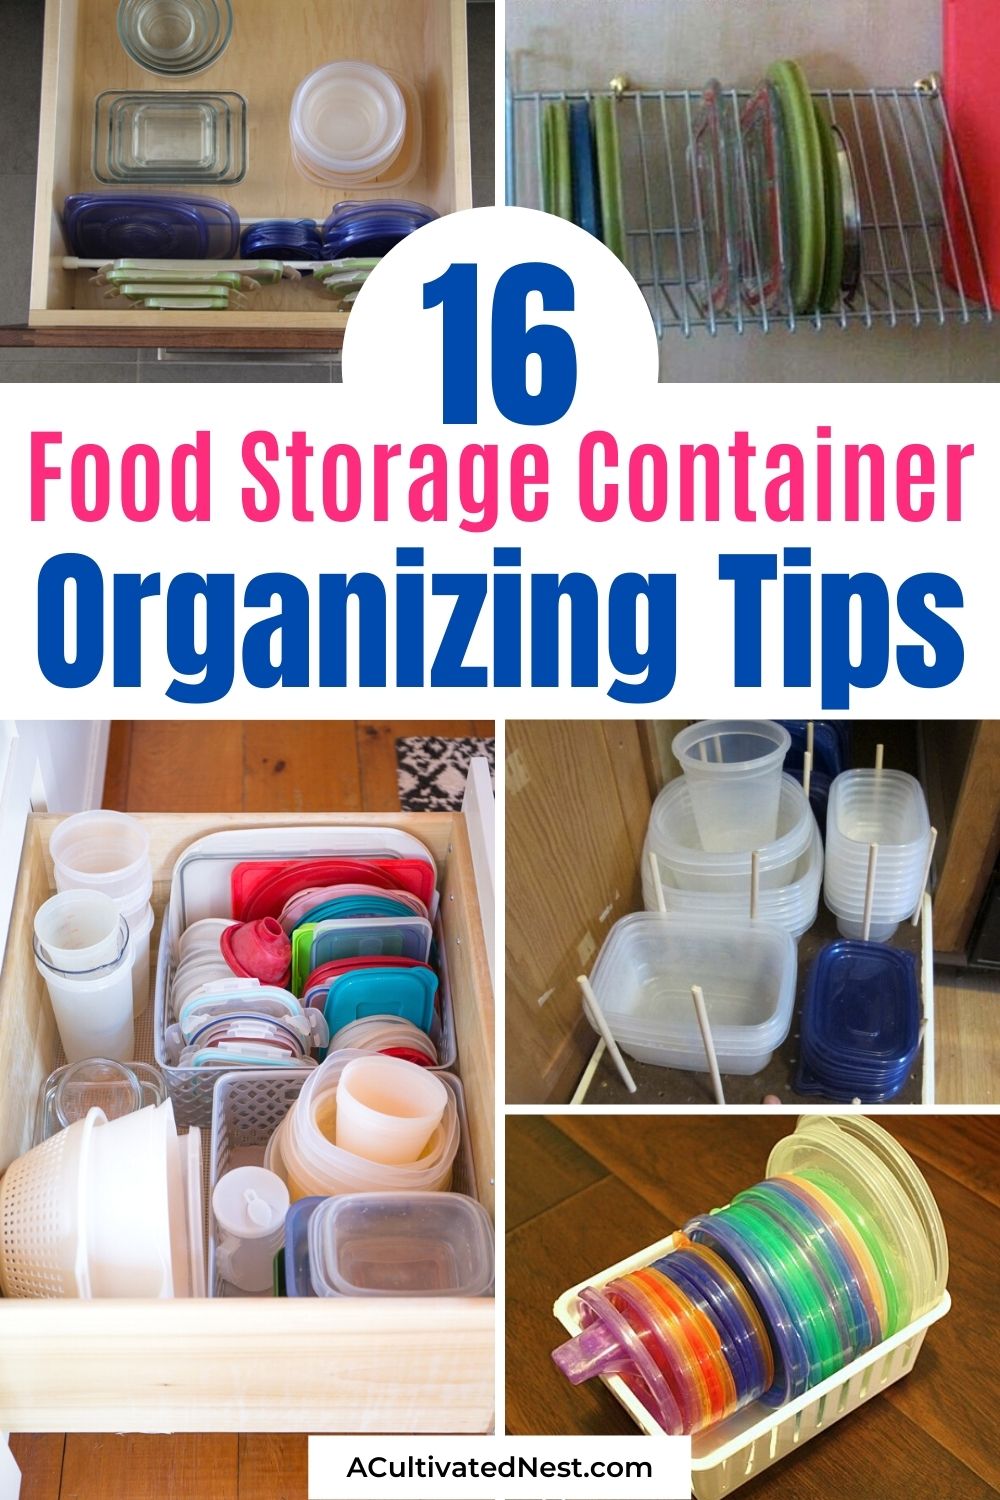 16 Handy Food Storage Container Organizing Tips- Tired of having to sift through a mess of plastic lids and containers to find the food storage you need? These food storage container organizing tips will get you organized fast! | Tupperware organizing, plastic container organizing, #kitchenOrganizing #organizingTips #organization #kitchenOrganization  #ACultivatedNest